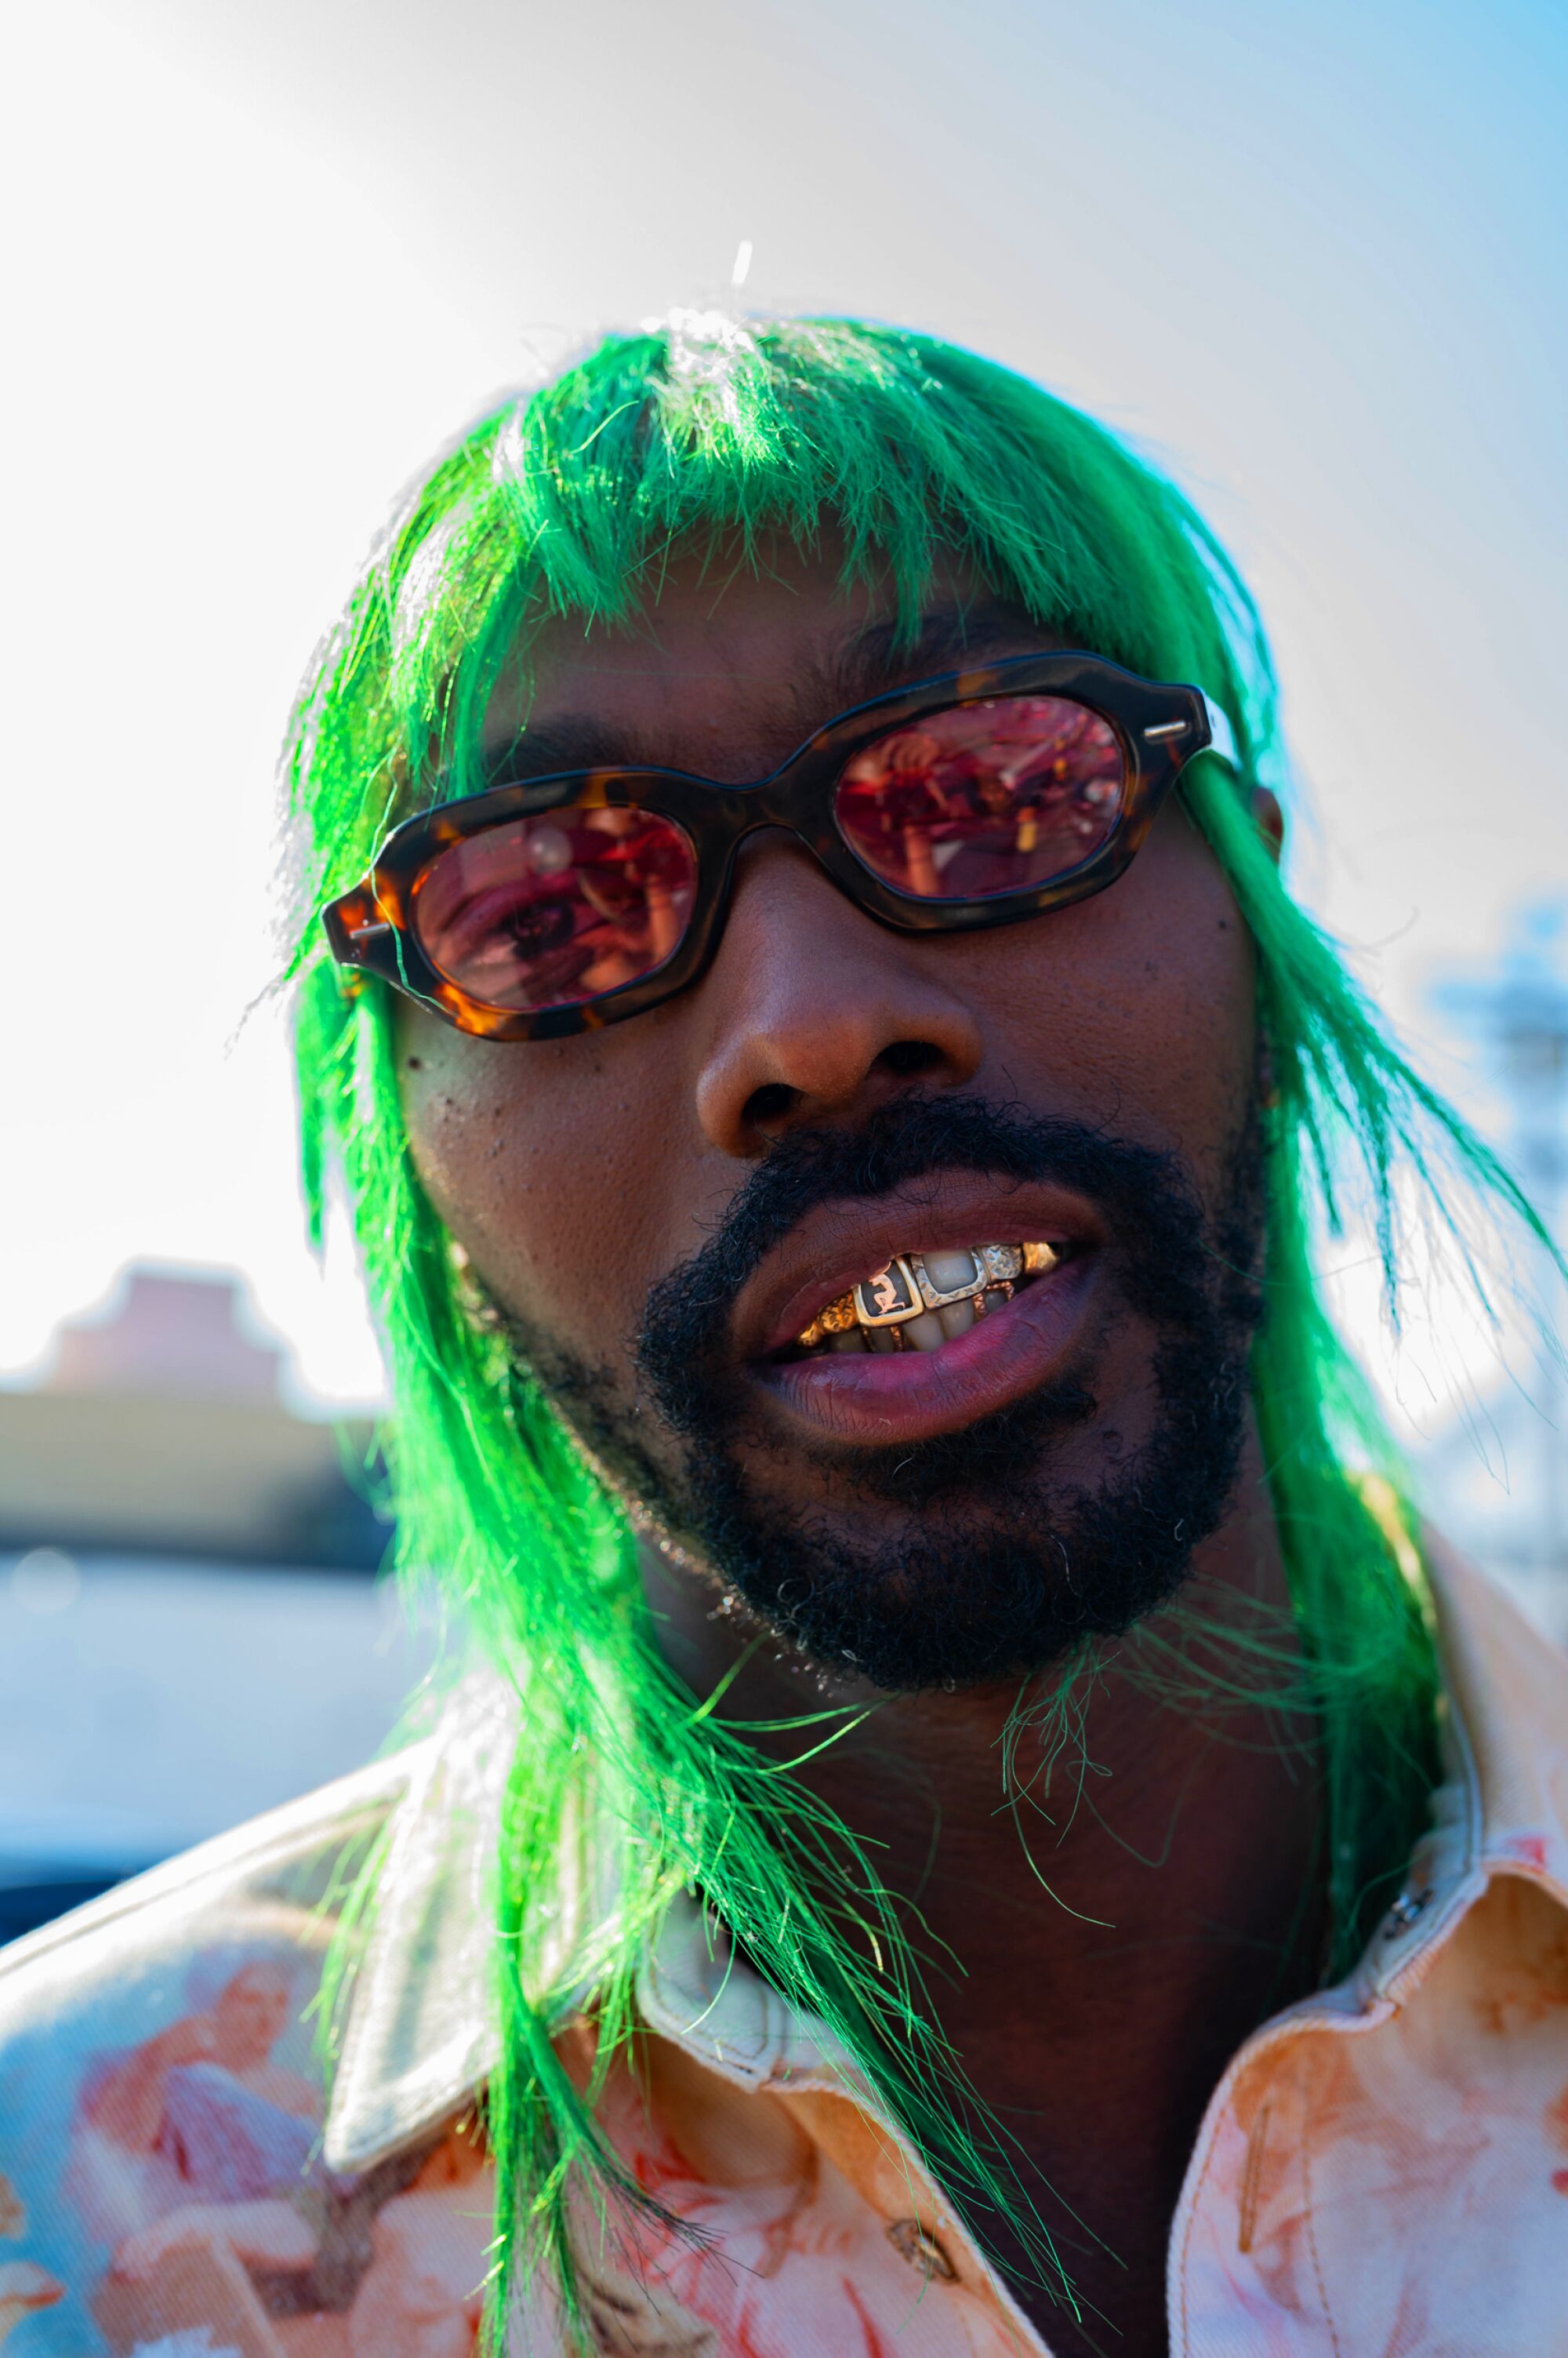 A person, wearing green hair and sunglasses, smiles.